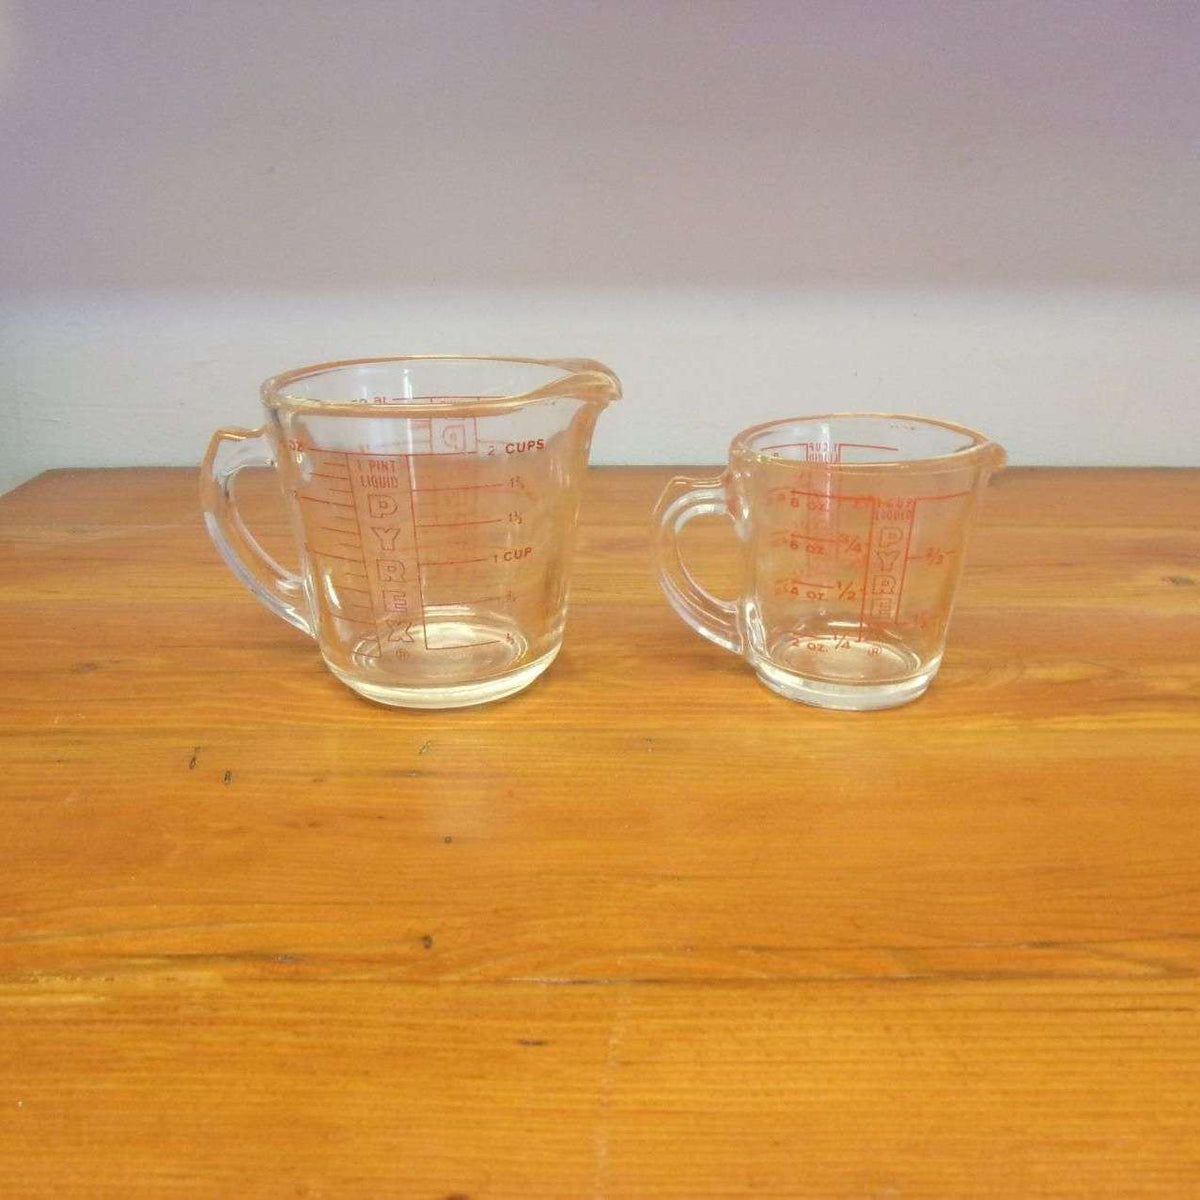 VTG. PYREX - 2 CUP 1 PT 16 OZ 500 ML - GLASS MEASURING CUP RED LETTERS #516  - Lil Dusty Online Auctions - All Estate Services, LLC